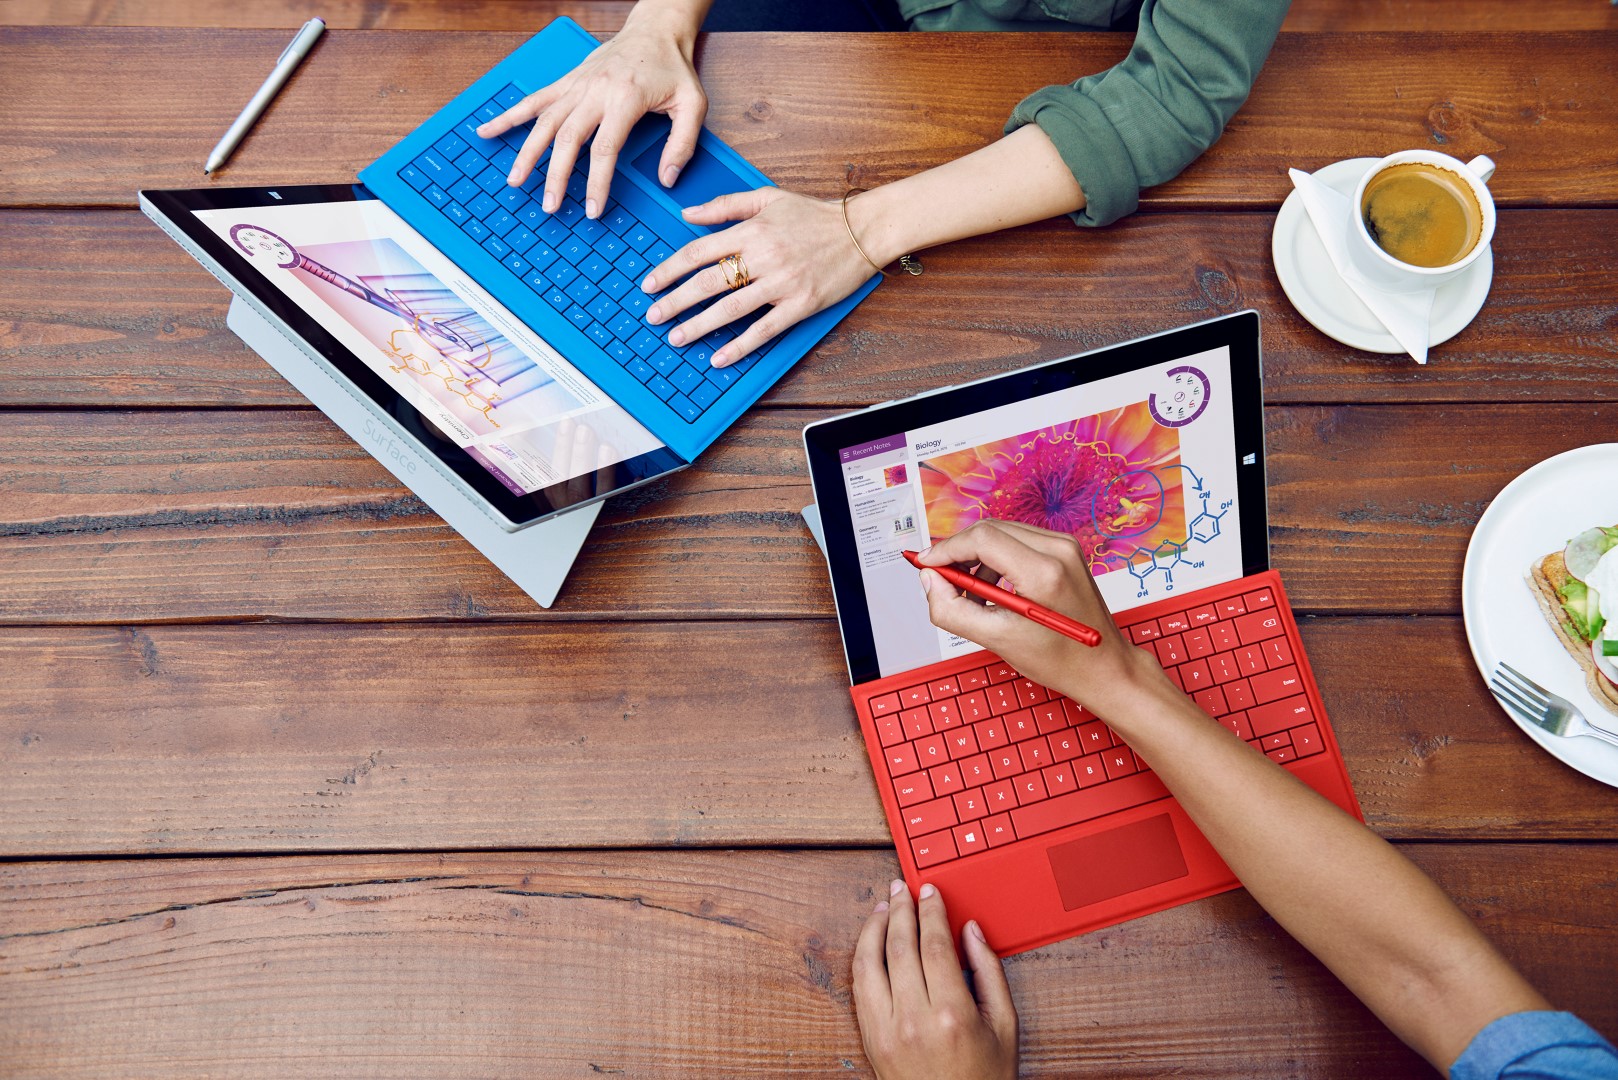 024_Microsoft_Surface_Cafe_OH-06315_VS_R1c (Large)